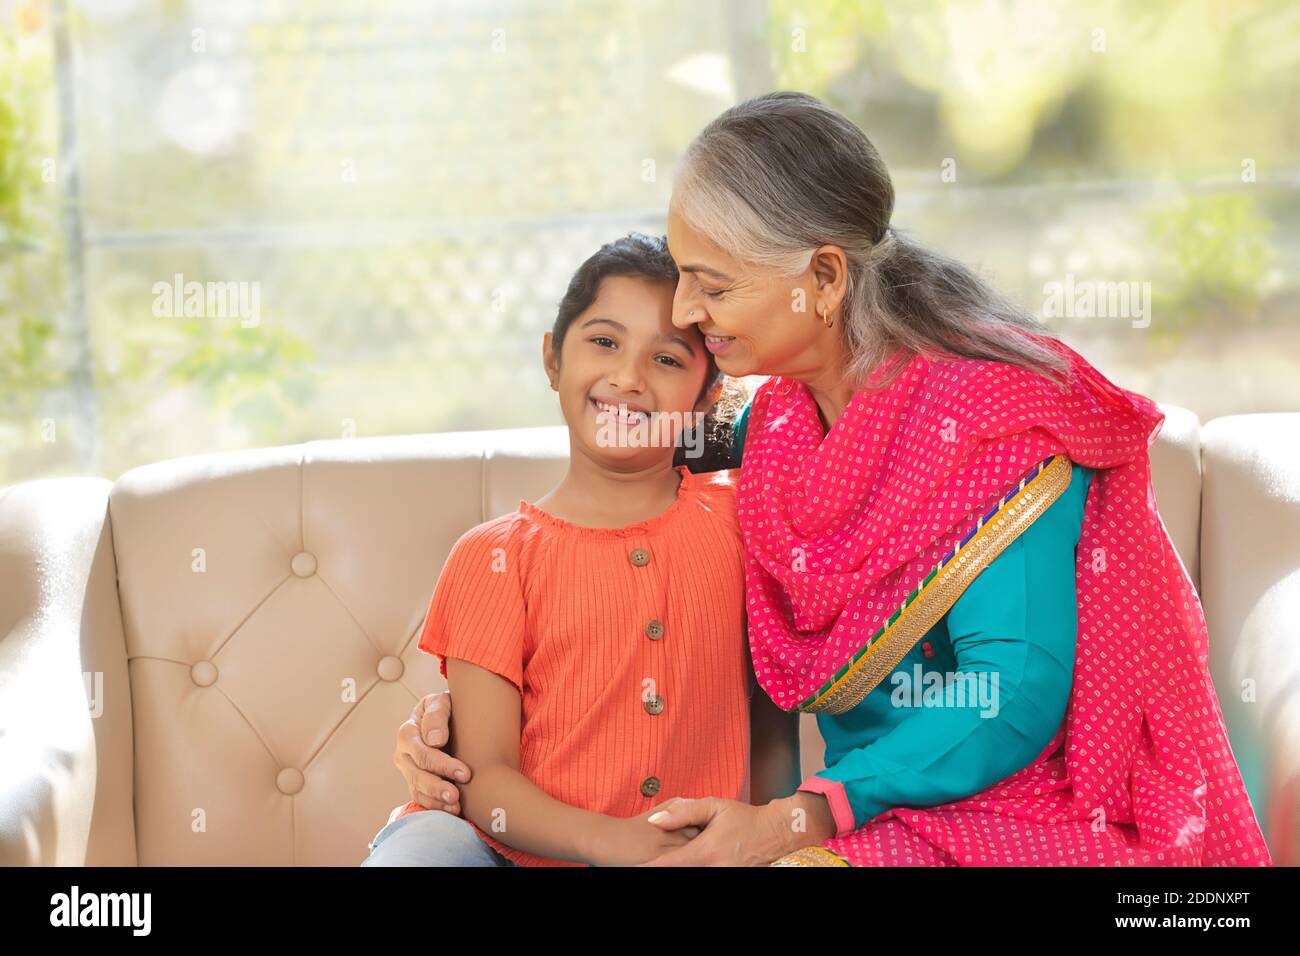 Grand mother holds her grand daughter as the grand daughter looks in to the camera Stock Photo